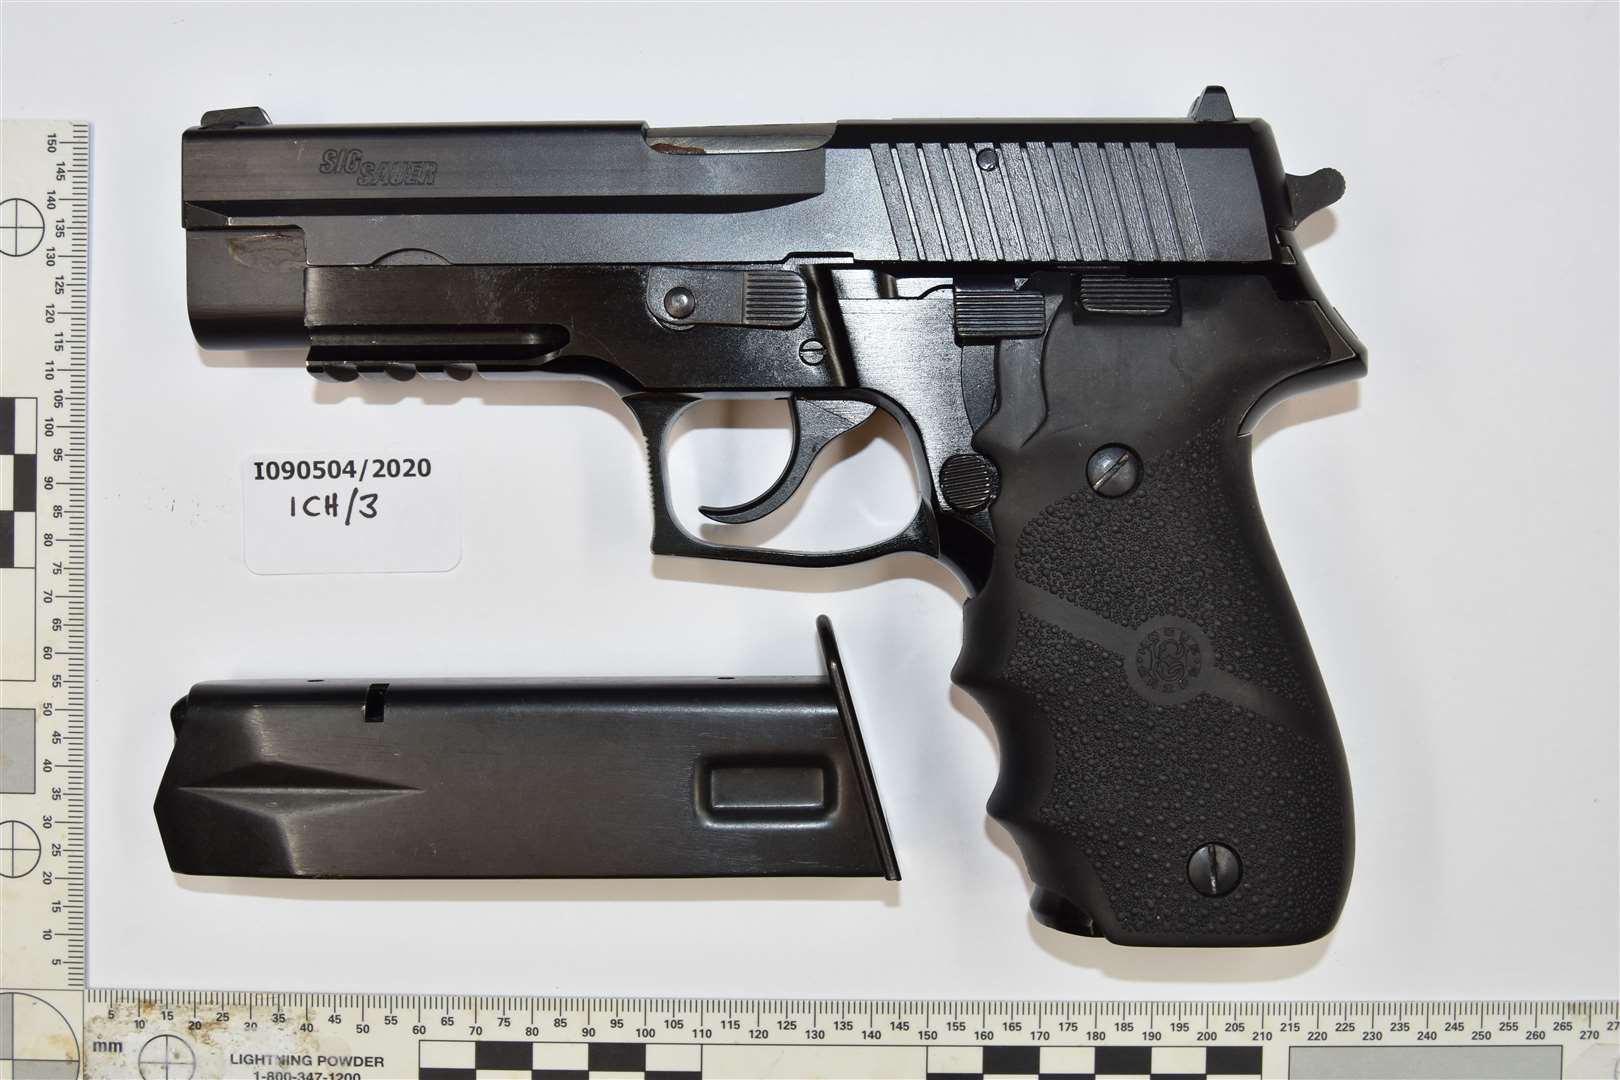 One of the weapons seized by the police. Photo: Met Police